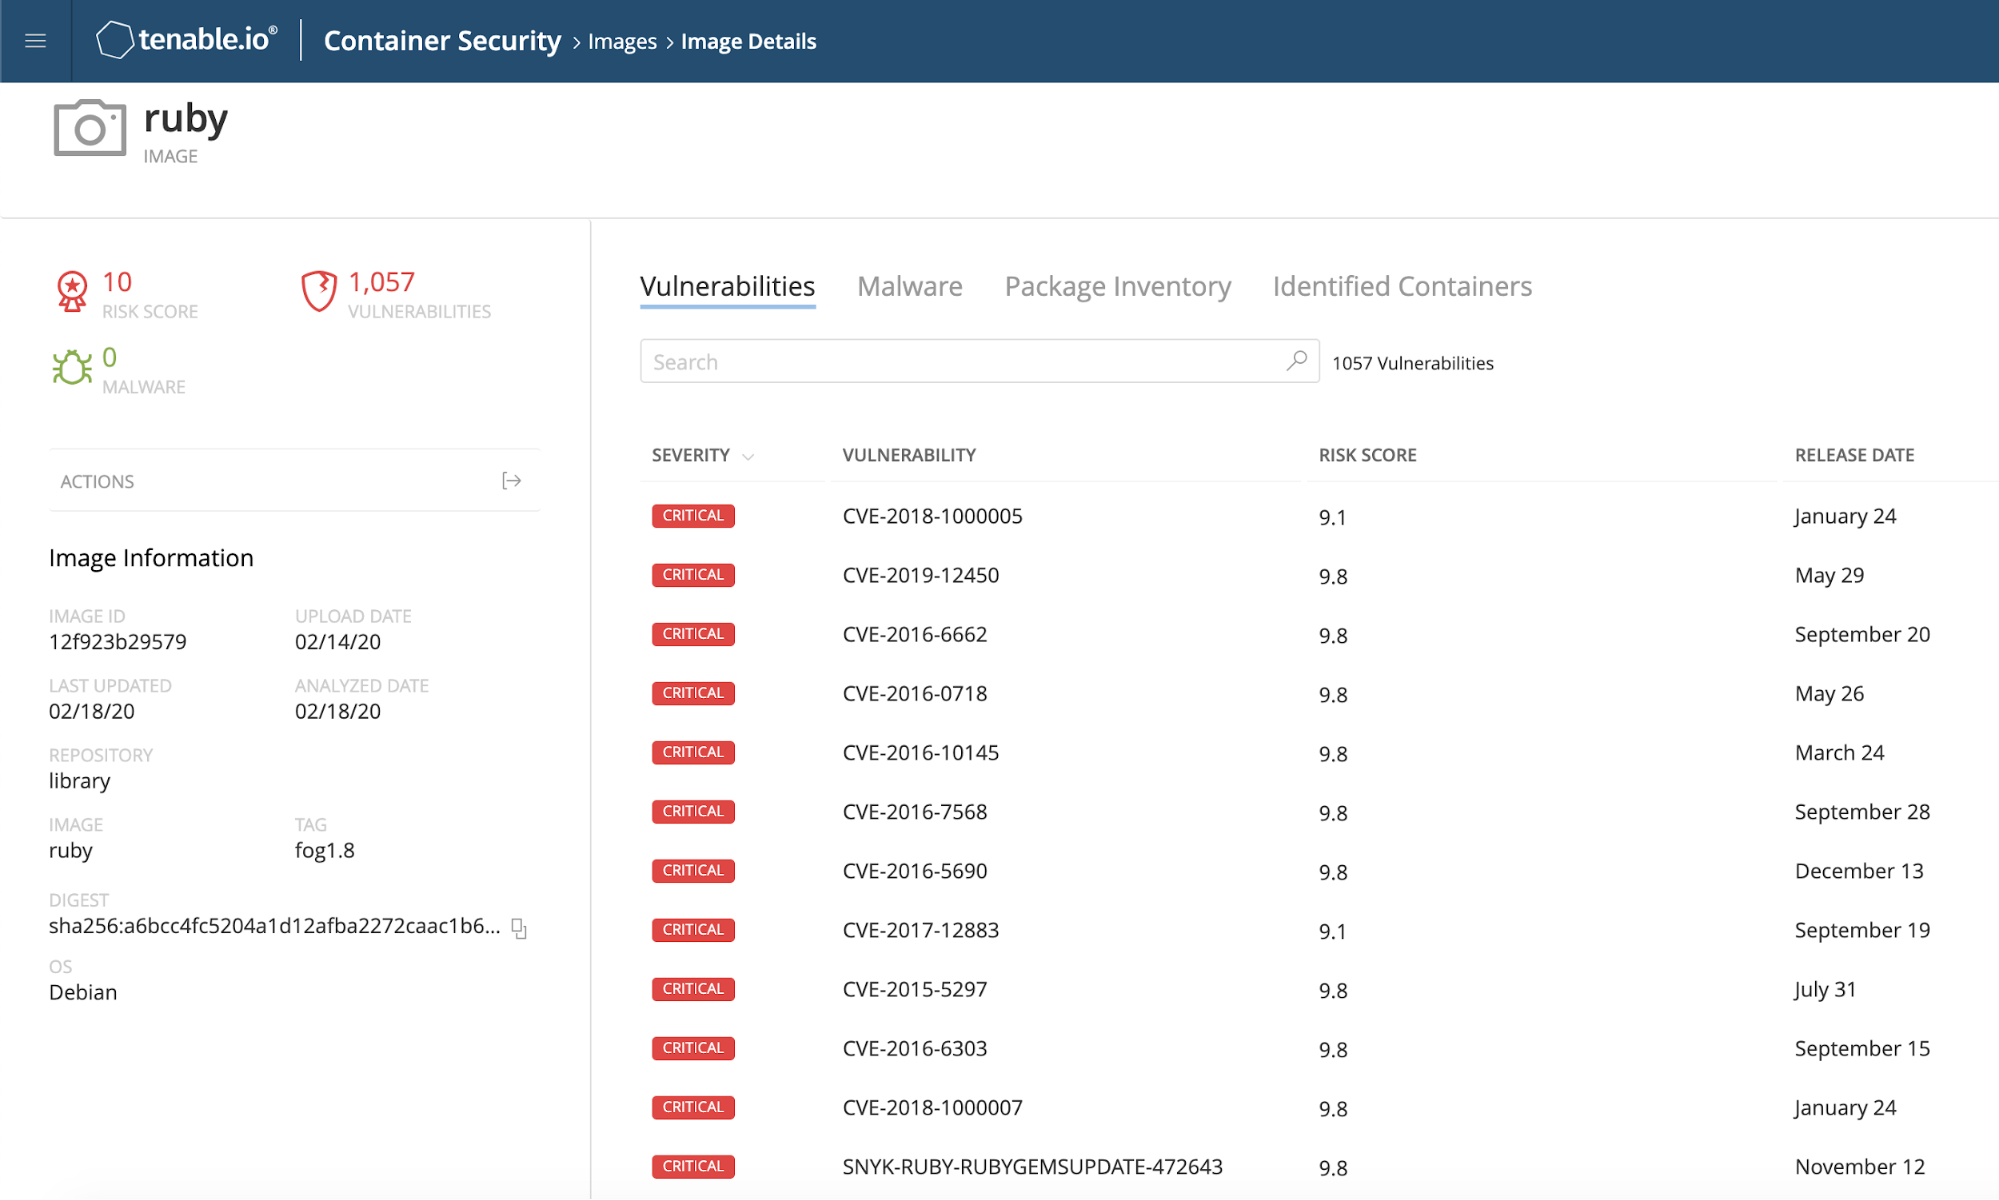 Image Details screenshot from Tenable.io Container Security